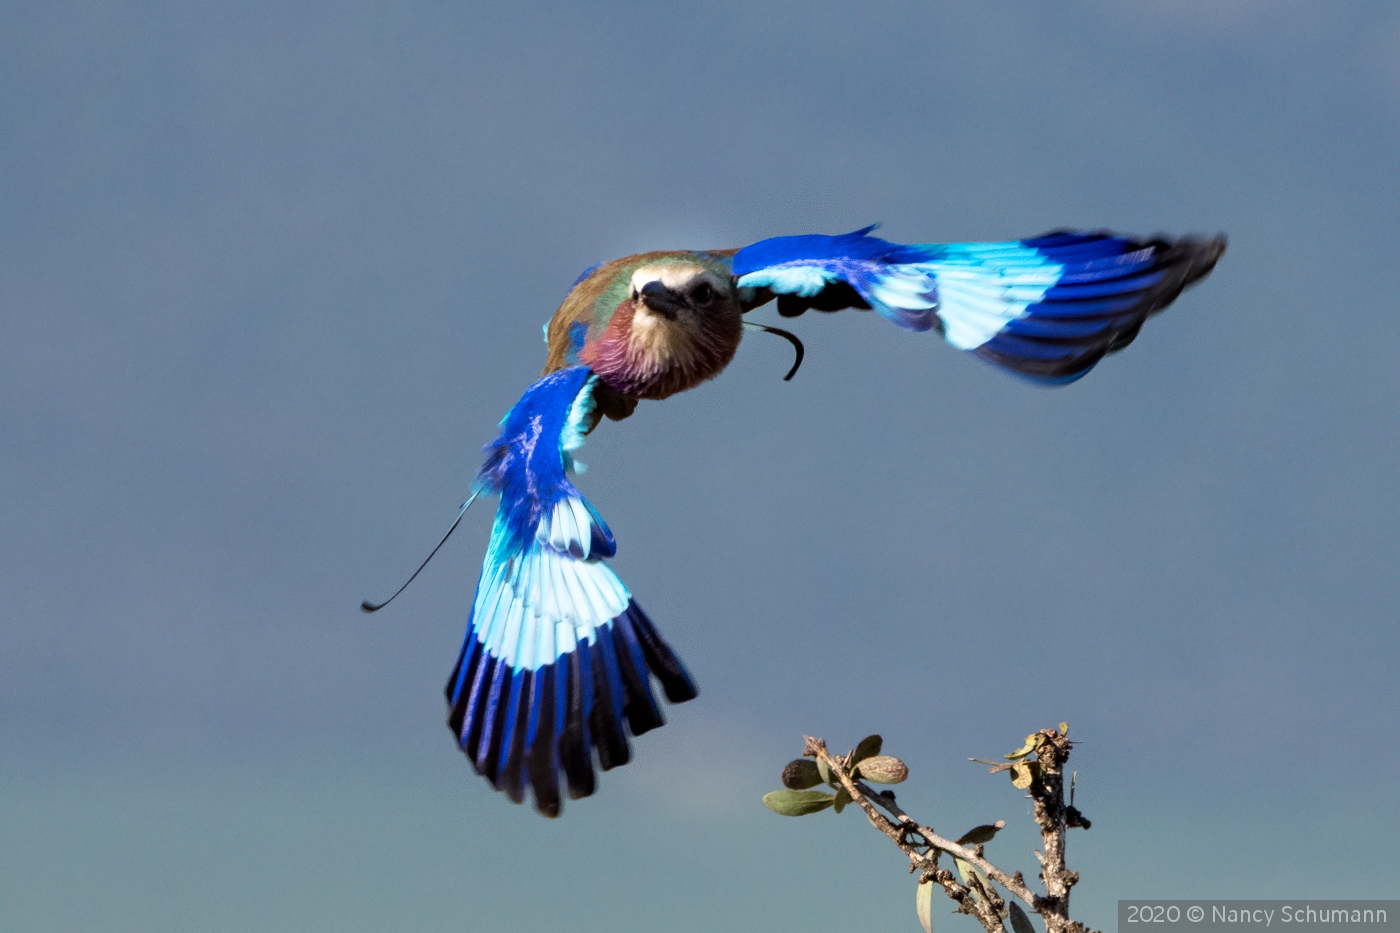 Lilac Breasted Roller by Nancy Schumann